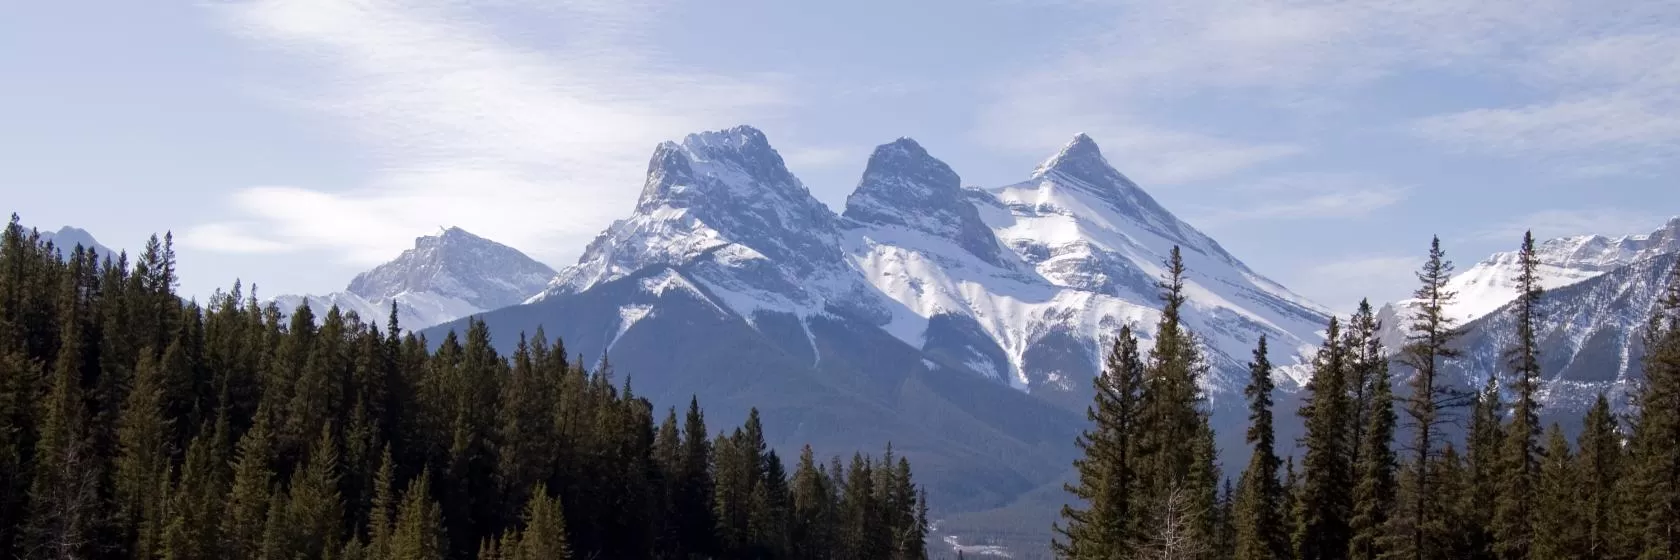 Canmore, Alberta Hotels